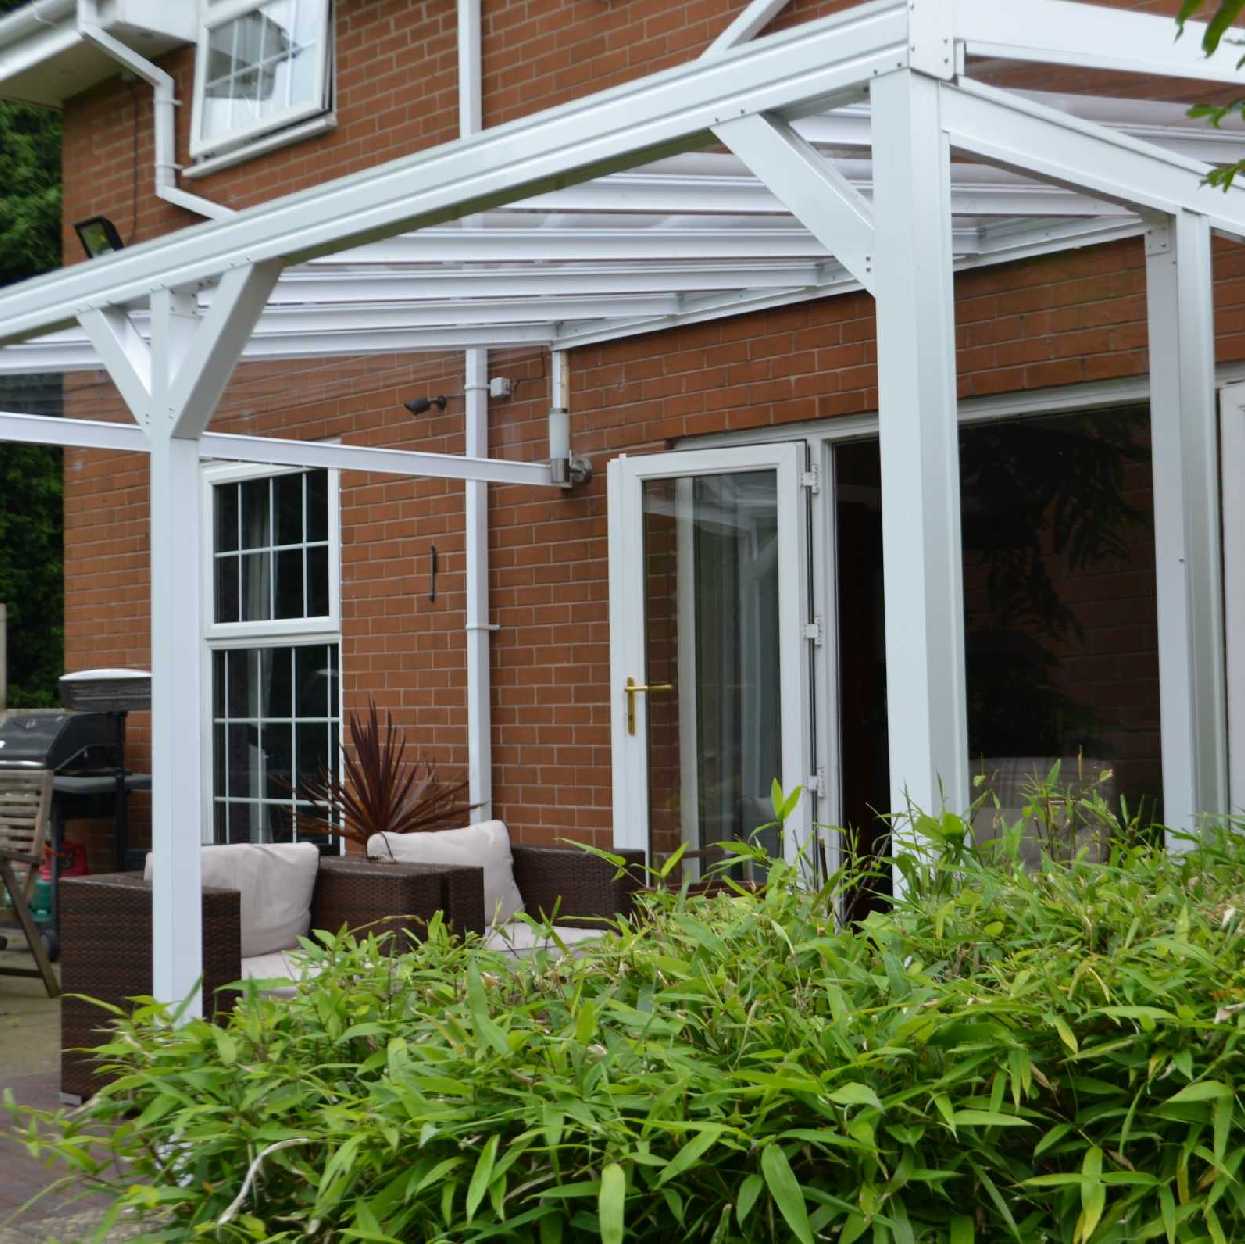 Omega Smart Lean-To Canopy, White with 6mm Glass Clear Plate Polycarbonate Glazing - 8.4m (W) x 3.5m (P), (4) Supporting Posts from Omega Build